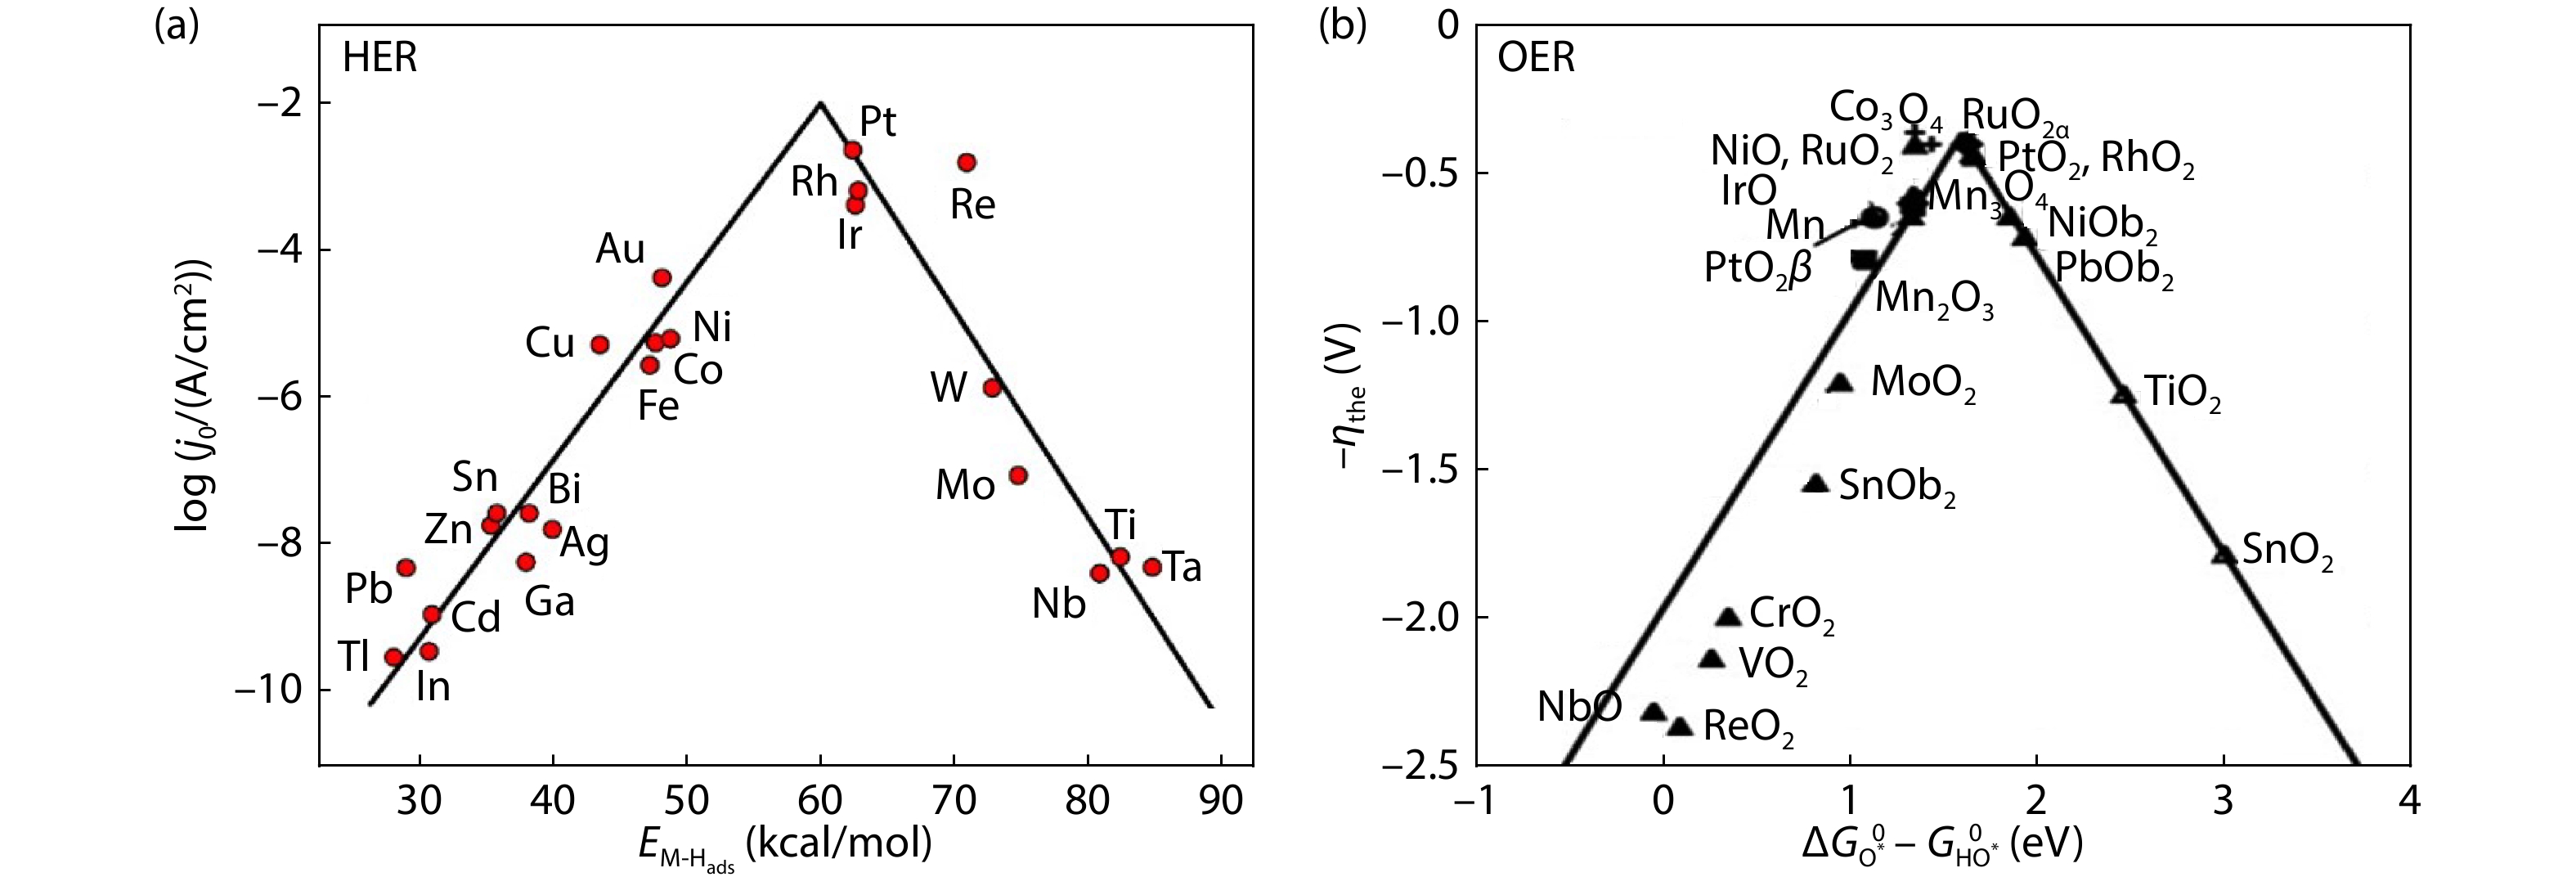 (a) Volcano plot for the HER on metal electrodes in acidic media[20]. Reprinted with permission, Copyright 2010, American Chemical Society. (b) Activity trends for OER as a function of for rutile and anatase oxides. The activity is expressed by the value of overpotential to achieve a certain value of current density[17]. Reprinted with permission, Copyright 2011, WILEY-VCH Verlag GmbH & Co. KGaA, Weinheim.